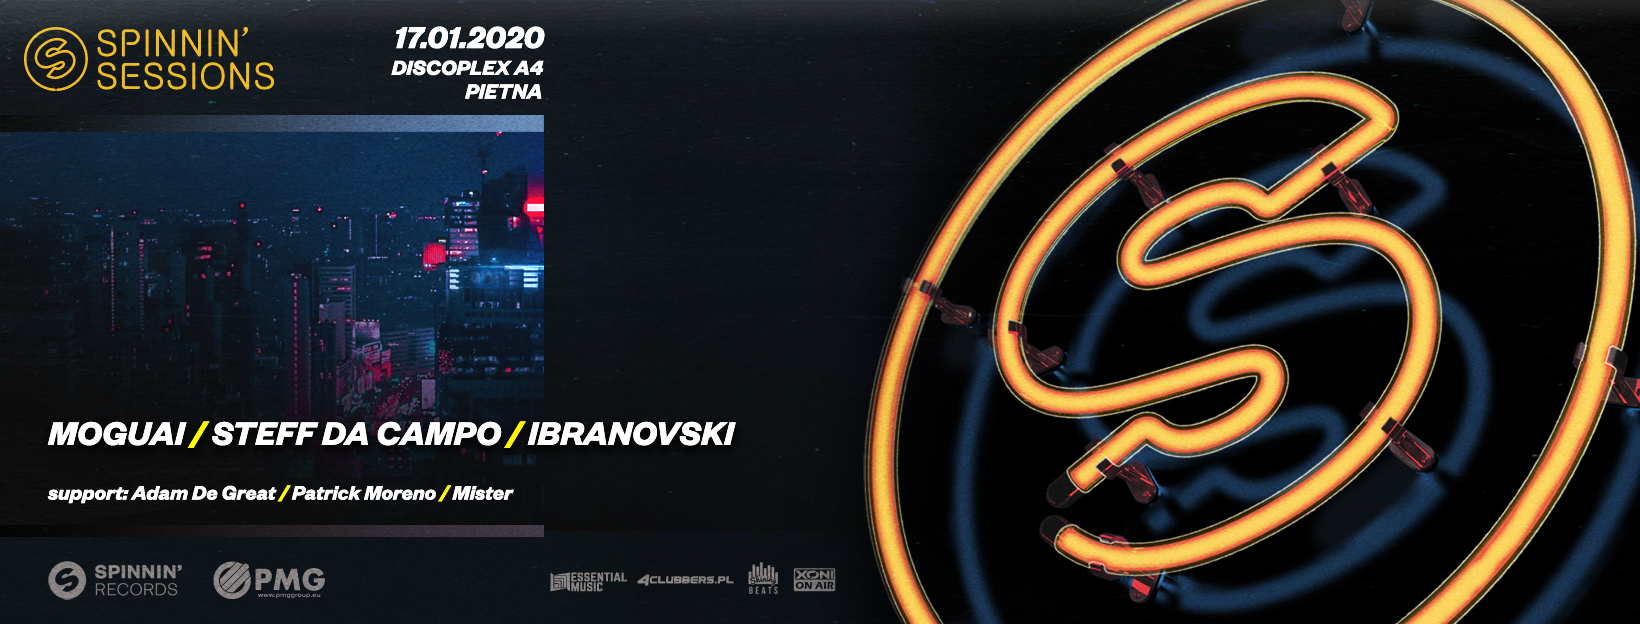 For the first time, Spinnin' Sessions travels to Poland!